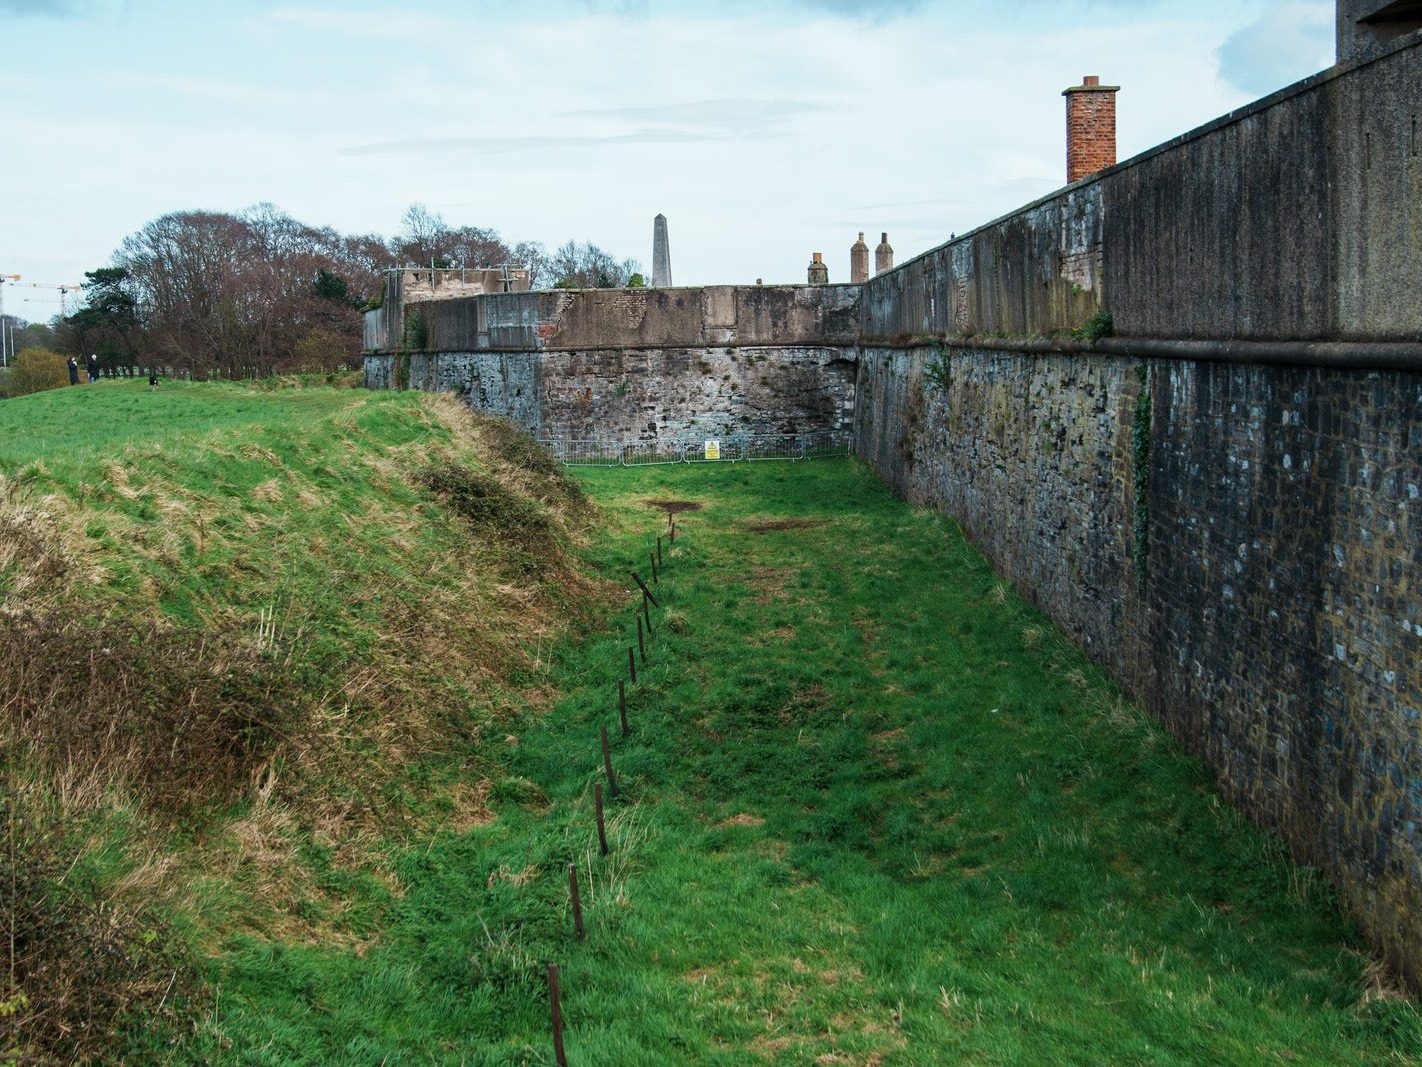 THE MAGAZINE FORT IN PHOENIX PARK [THERE IS MUCH INFORMATION AND A COMPLICATED STORY]-223483-1